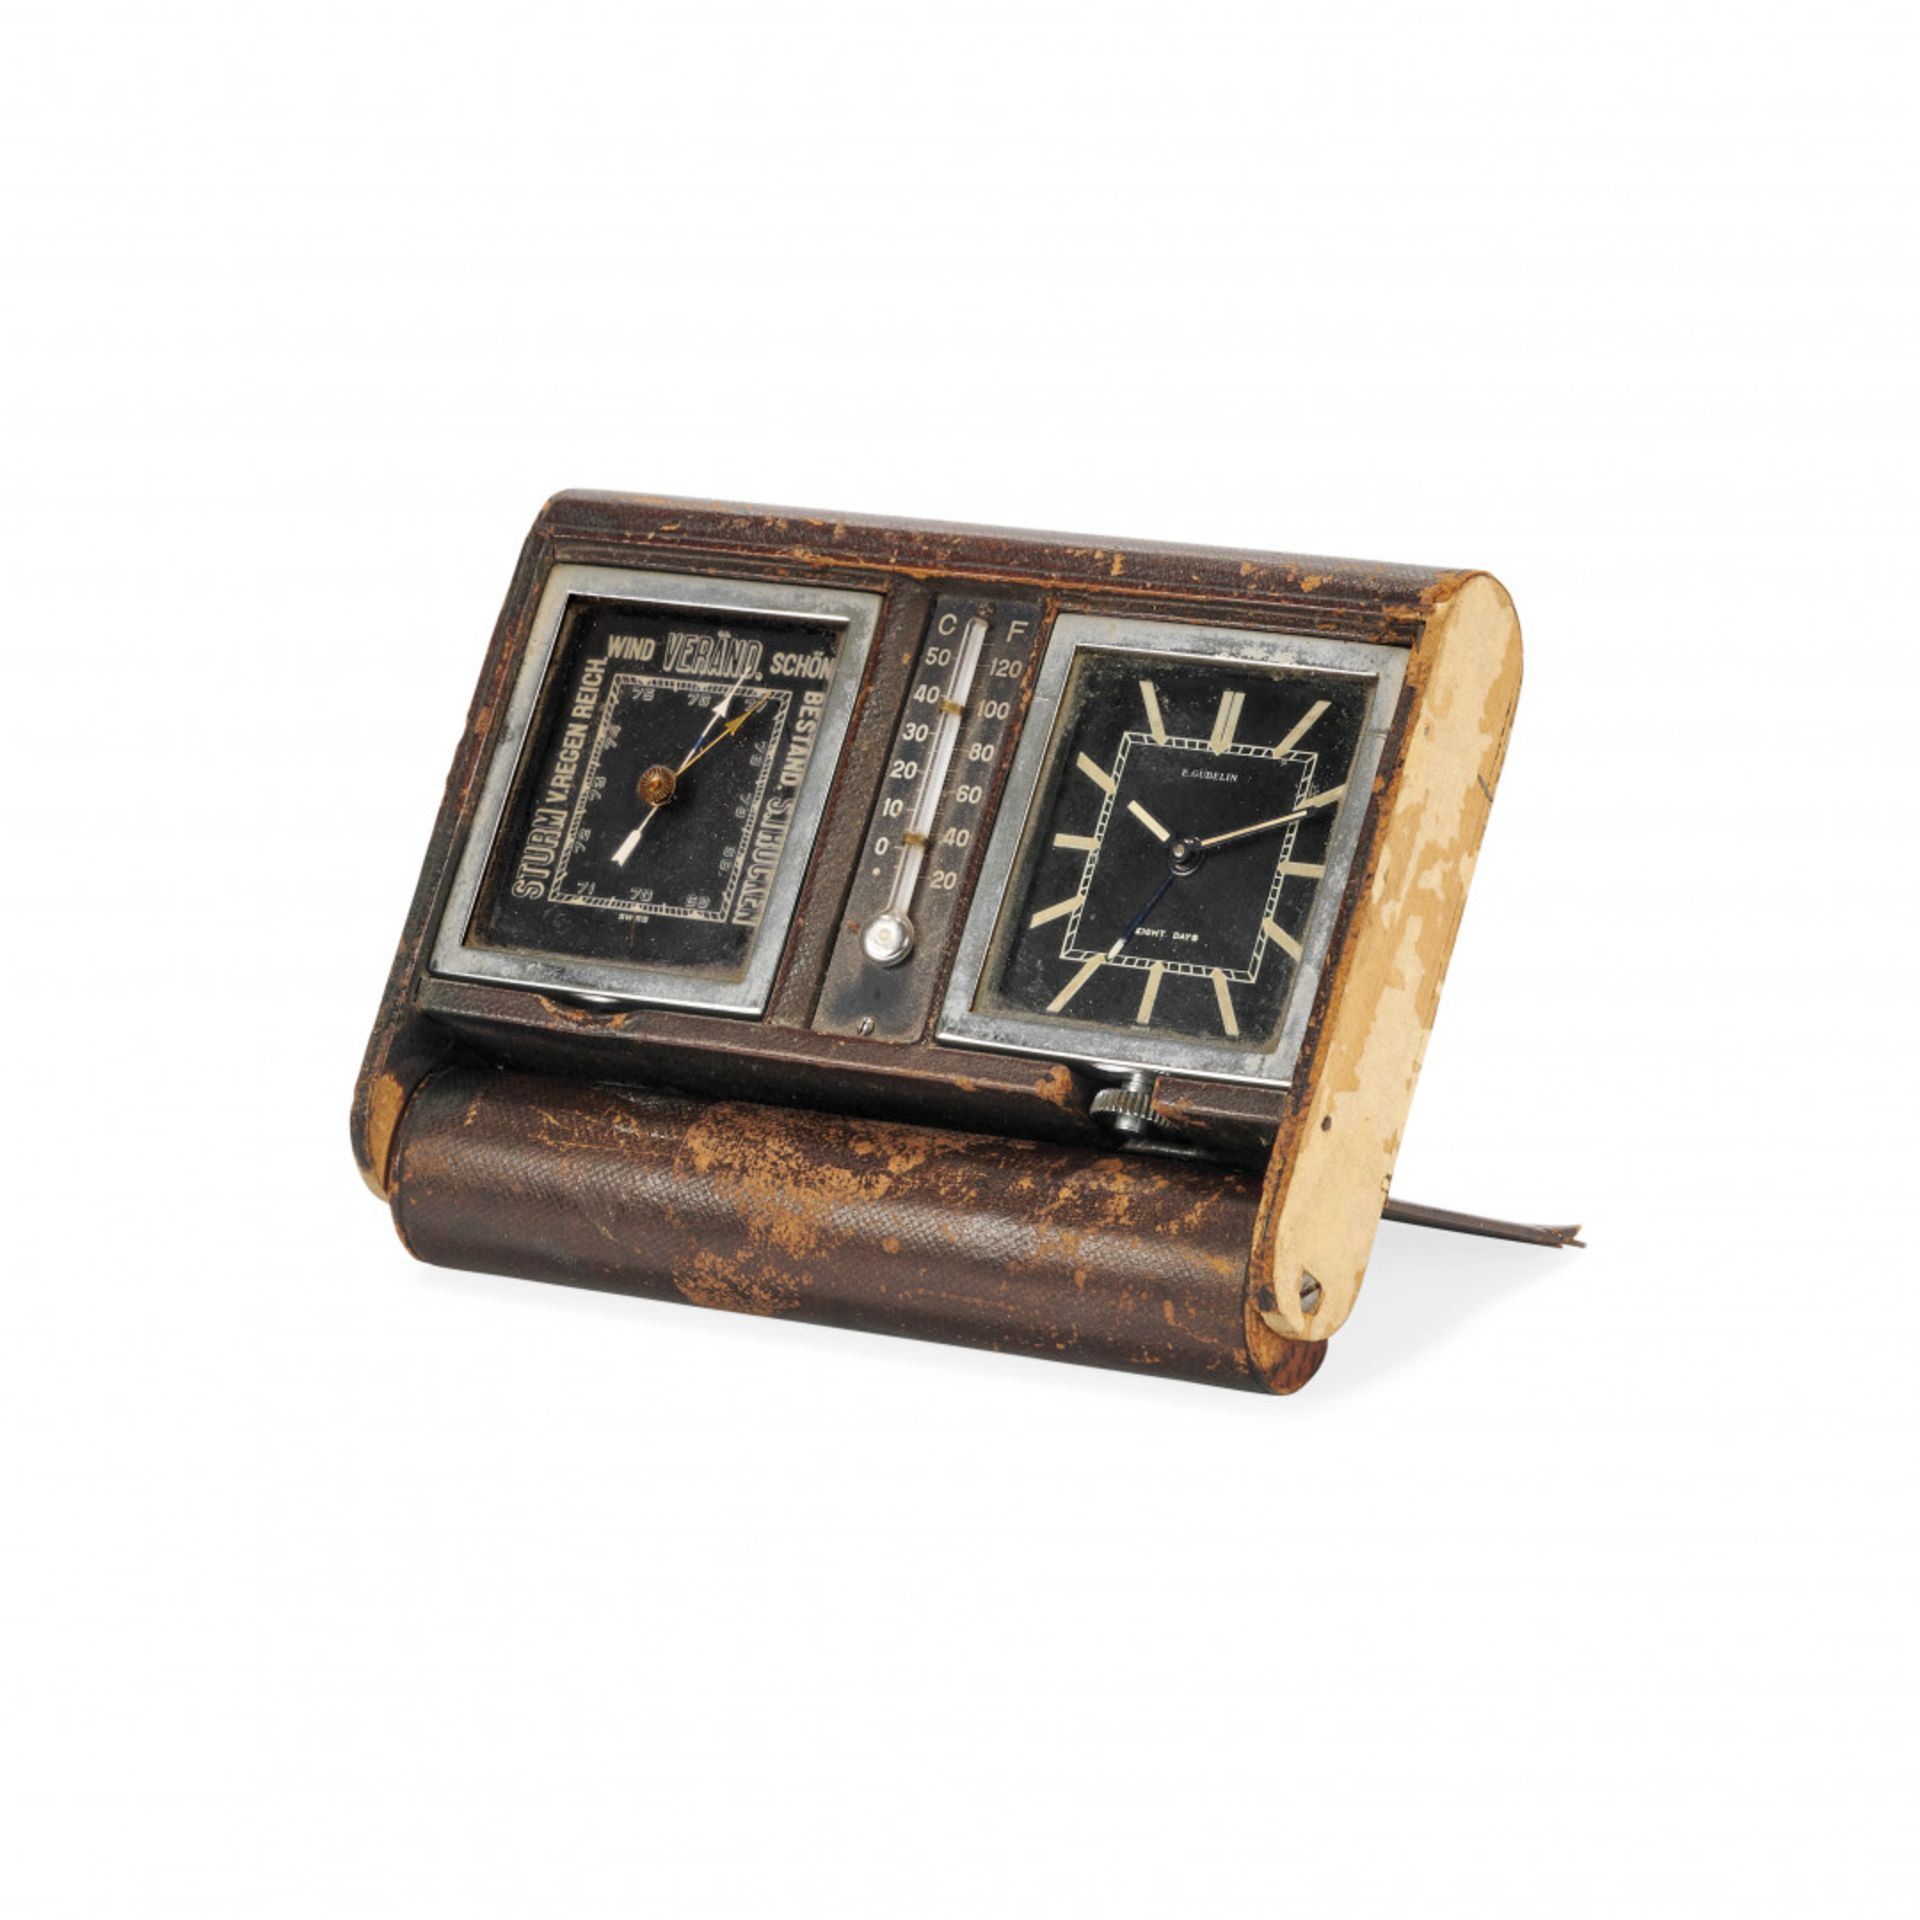 JAEGER-LECOULTRE SIGNED GÜBELIN WITH WEATHER STATION, 50s